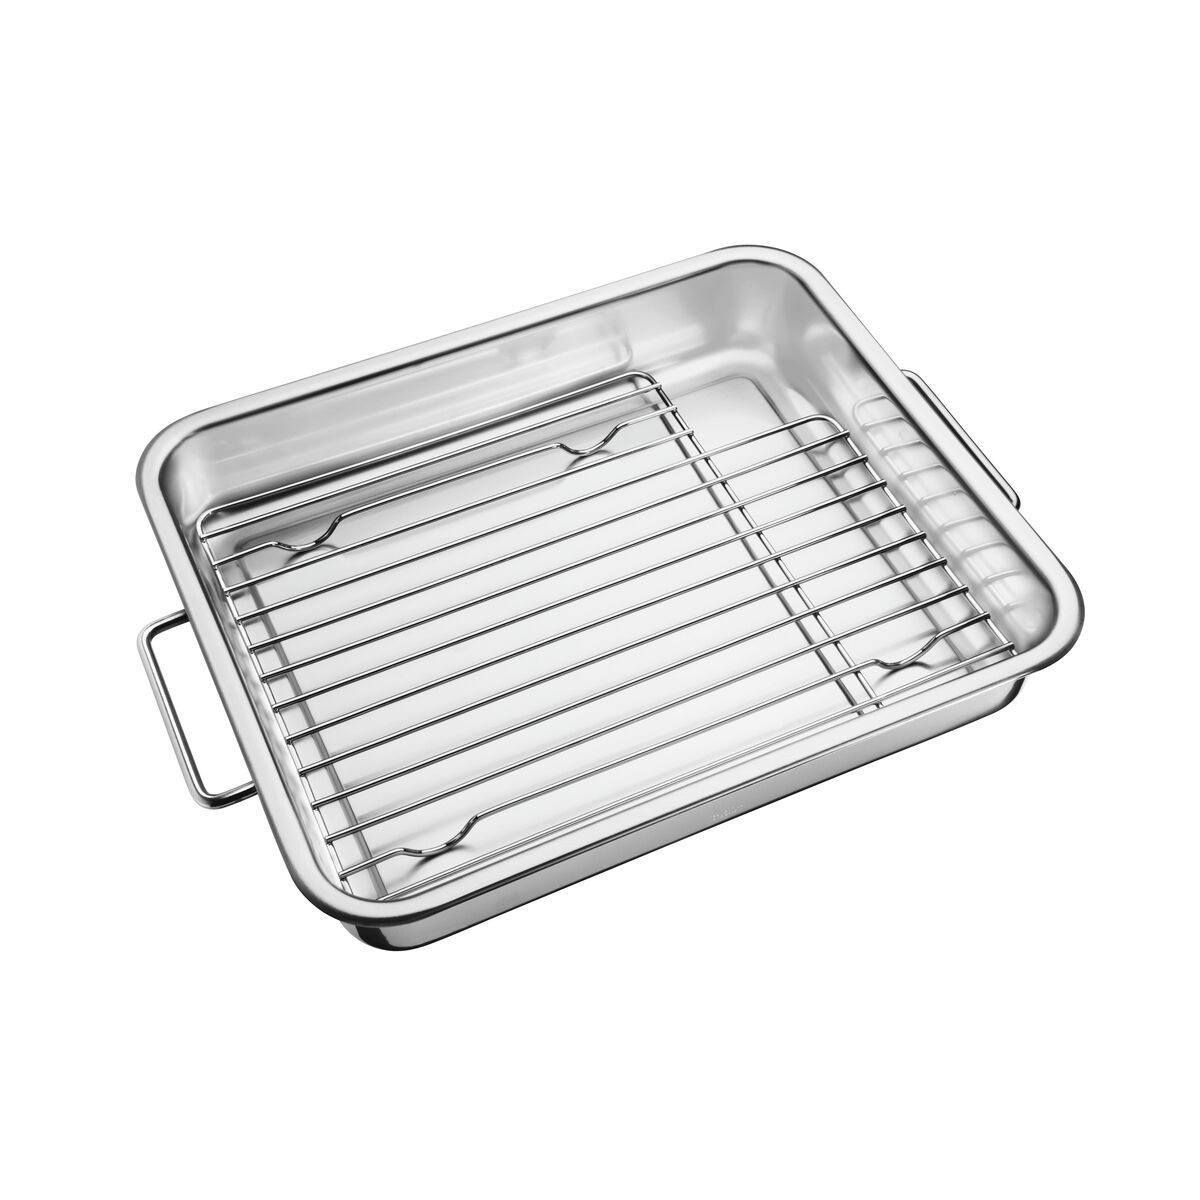 Tramontina Service 39 x 33 cm stainless steel roasting pan with rack 6,4 L